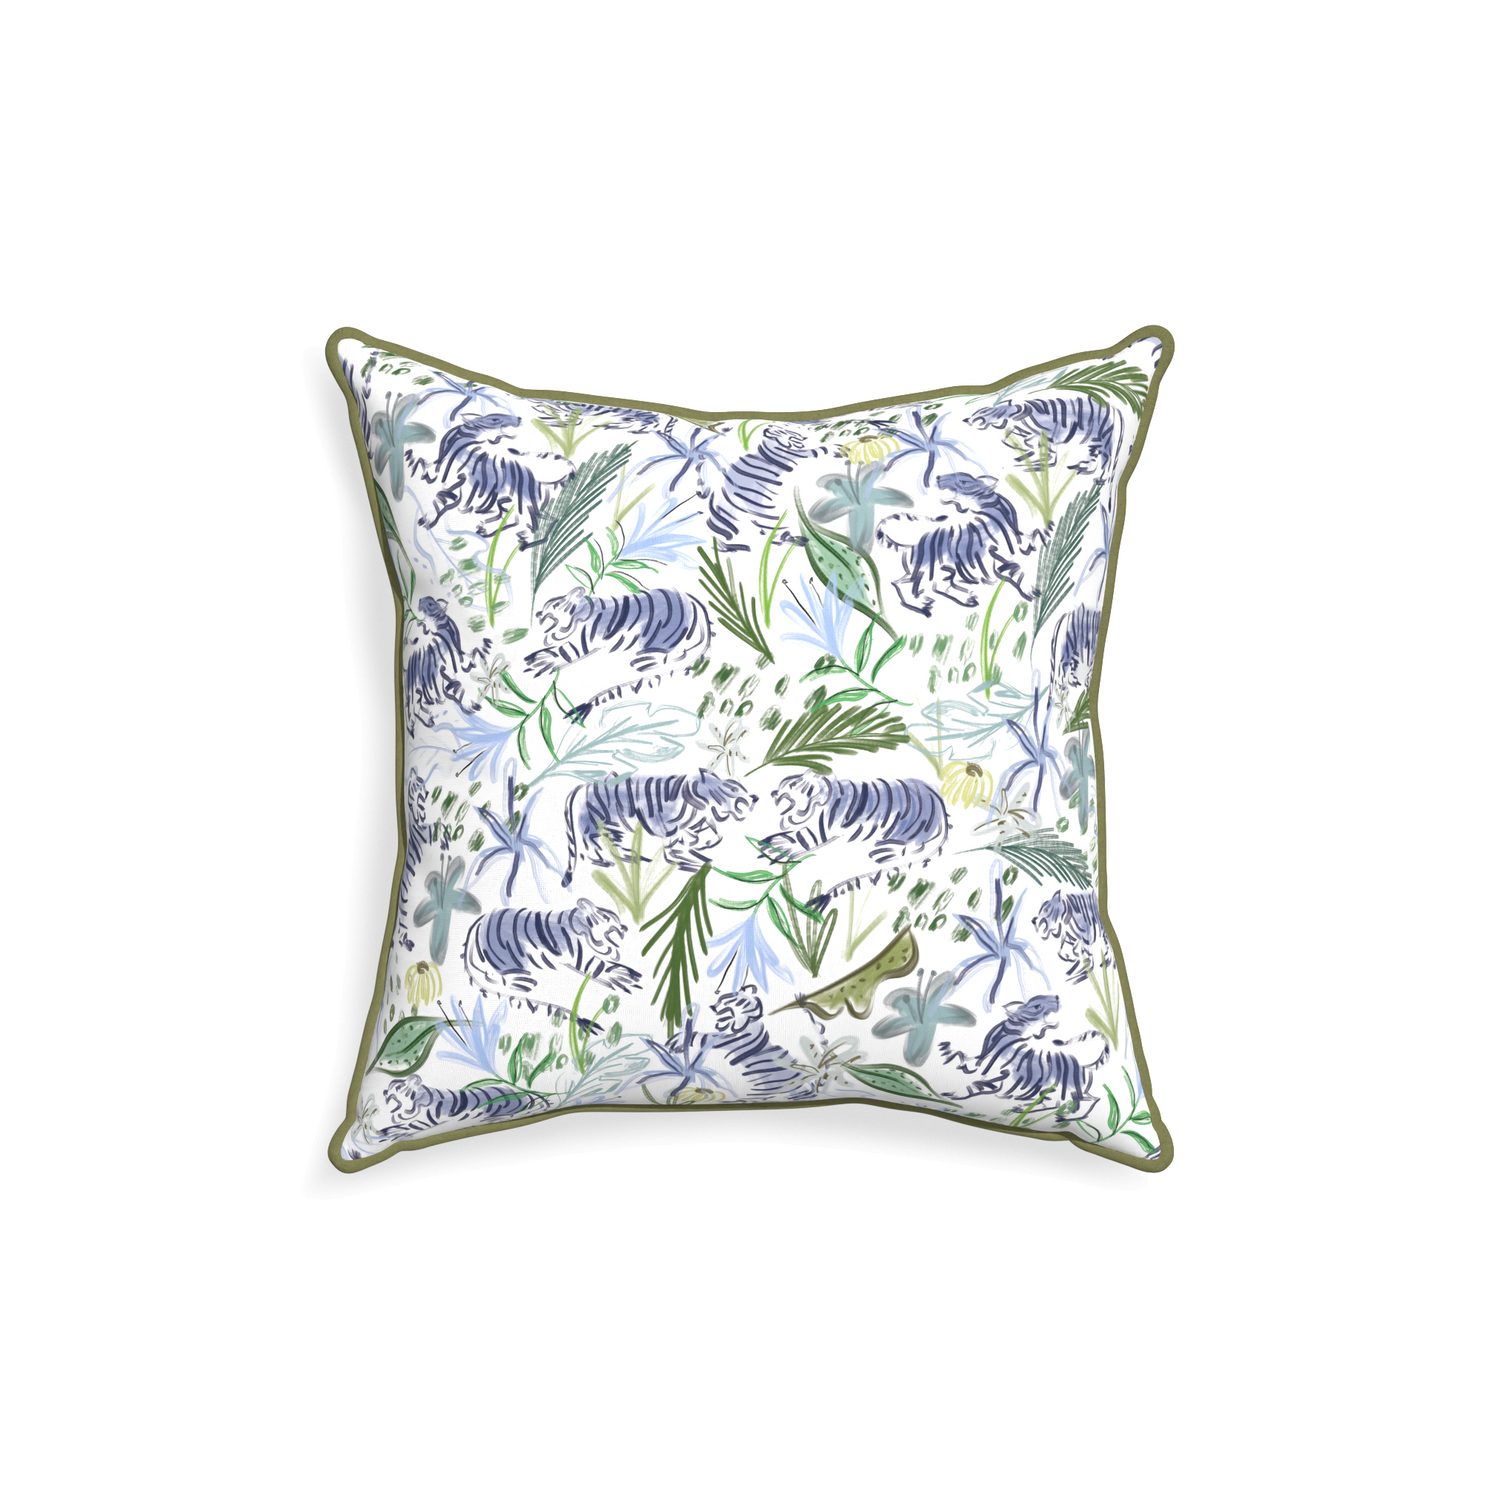 18-square frida green custom green tigerpillow with moss piping on white background